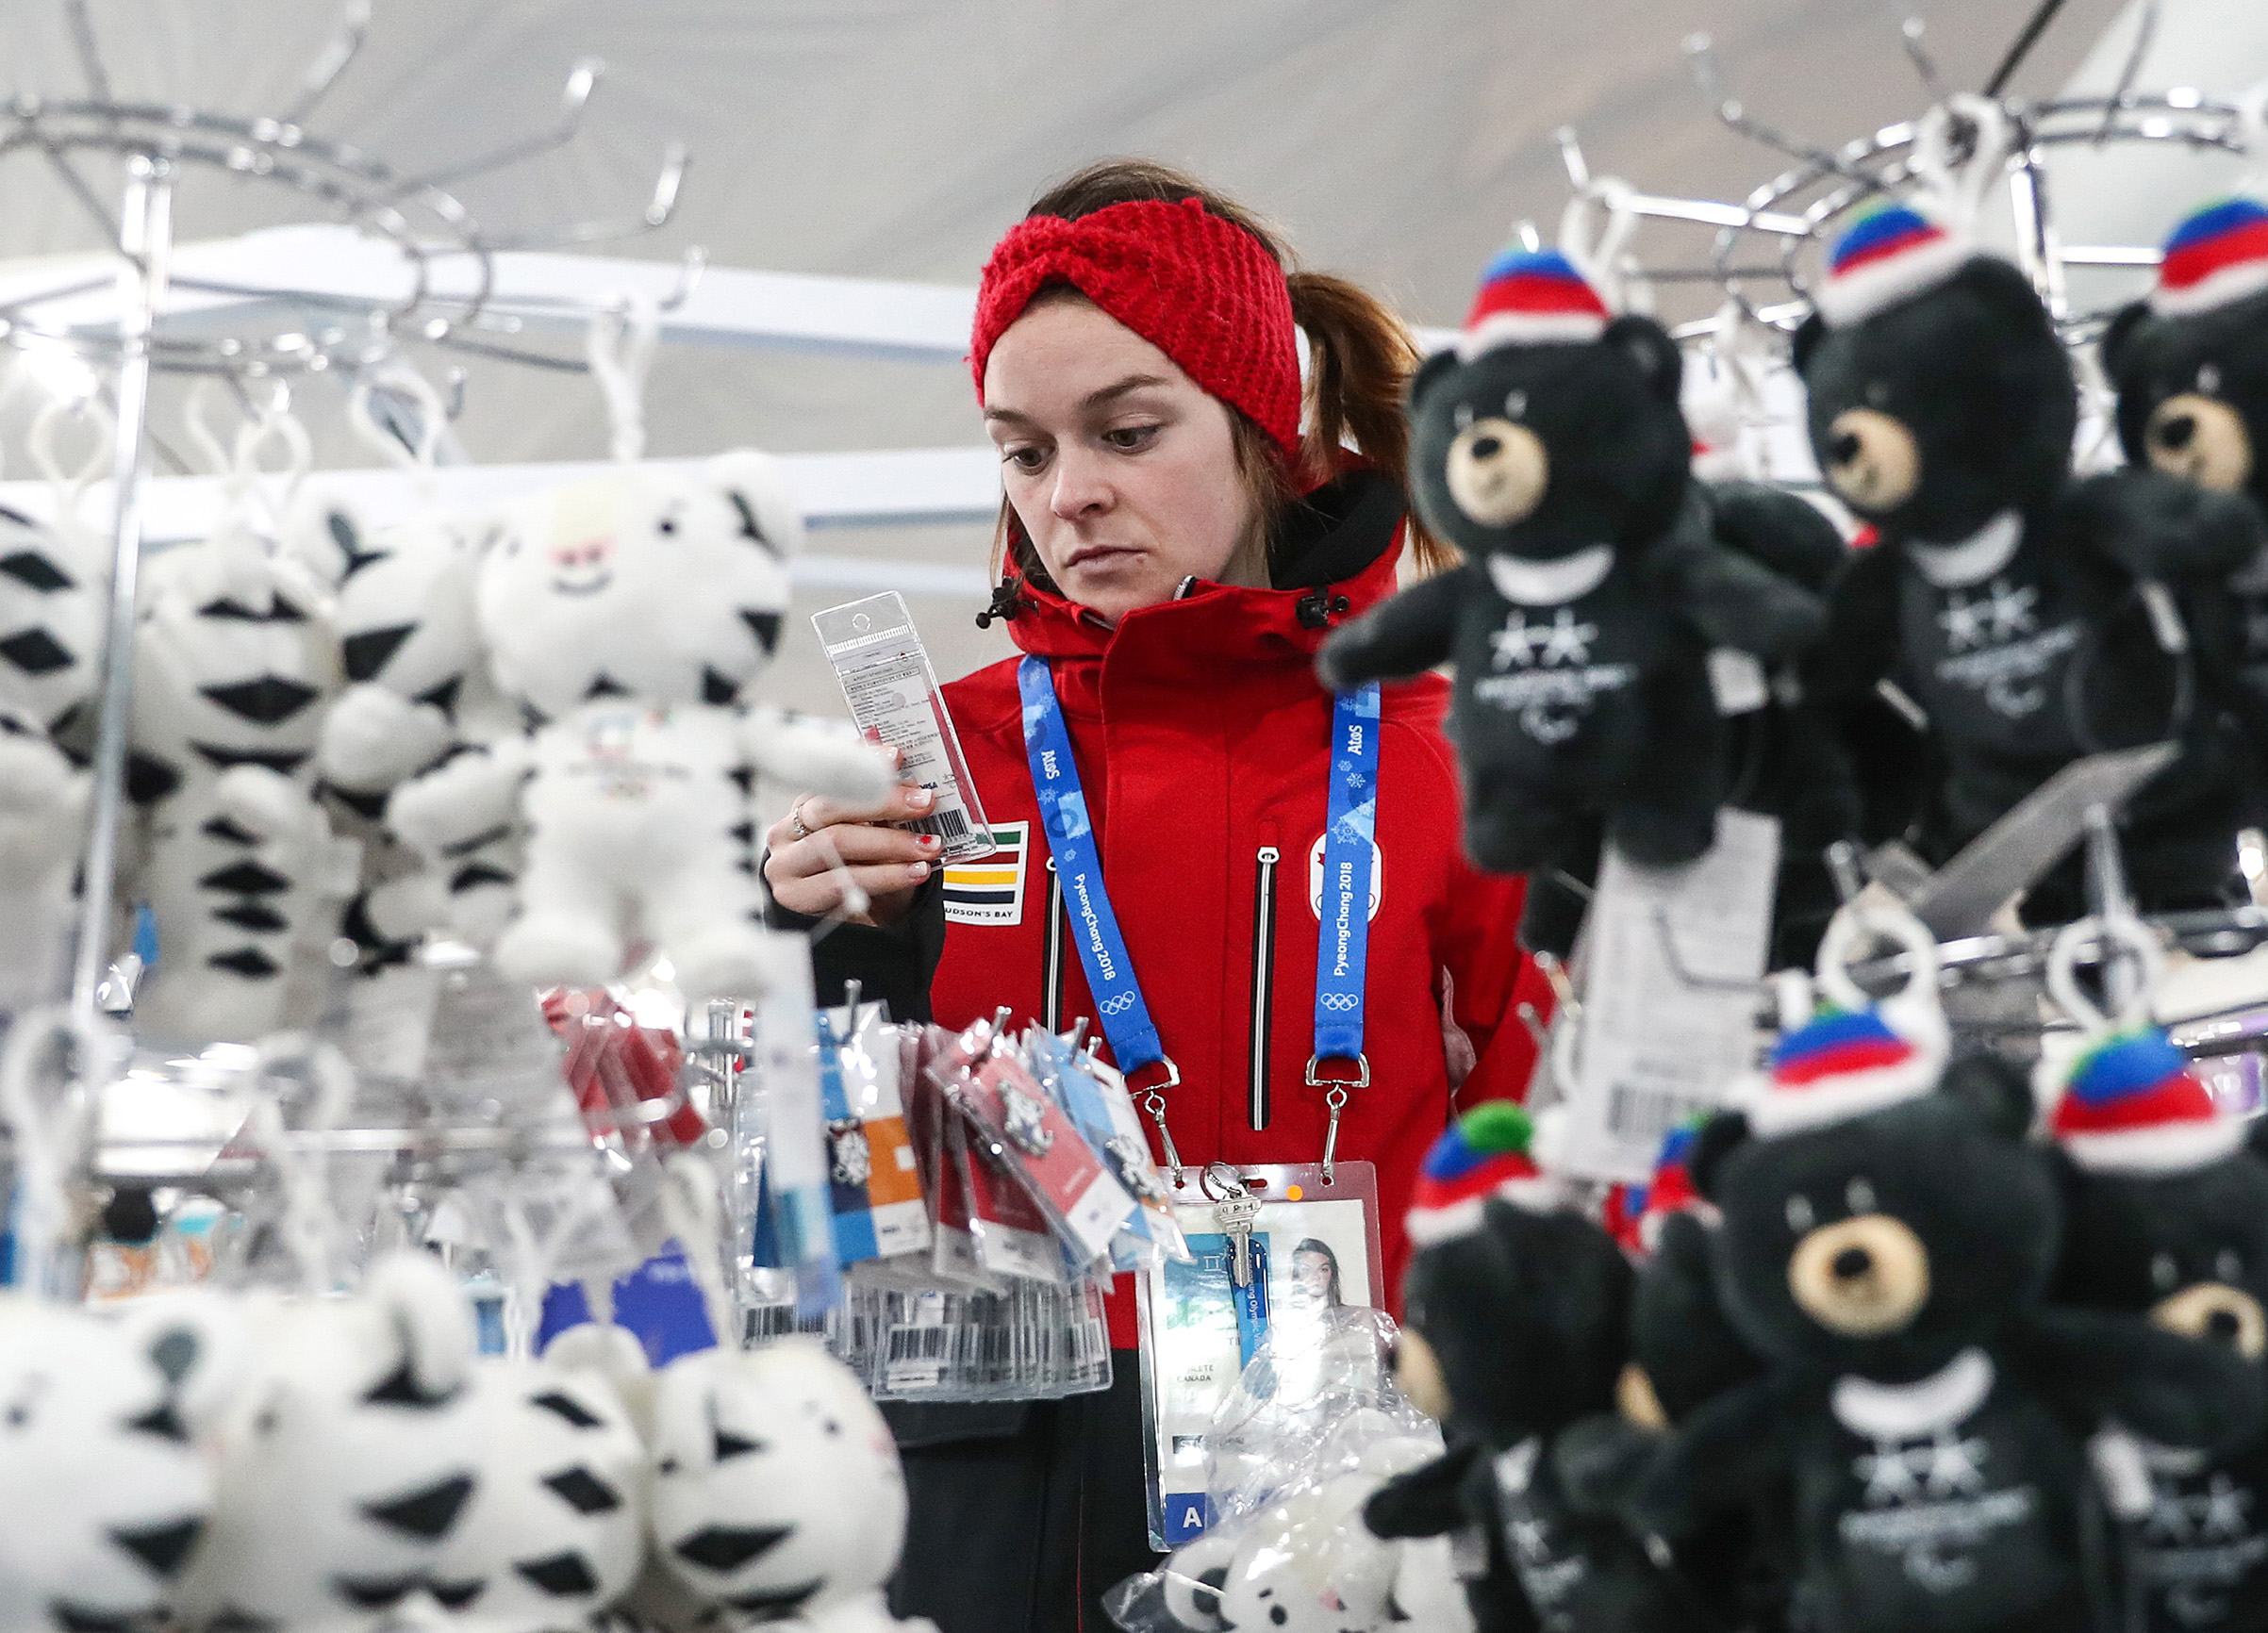 A girl seen by suffed toys of Soohorang and Bandabi, the official mascots of the 23rd Winter Olympic Games and the 12th Winter Paralympic Games in Pyeongchang respectively, on sale in the Olympic Village ahead of the 2018 Winter Olympic Games. (Valery Sharifulin—TASS/Getty Images)